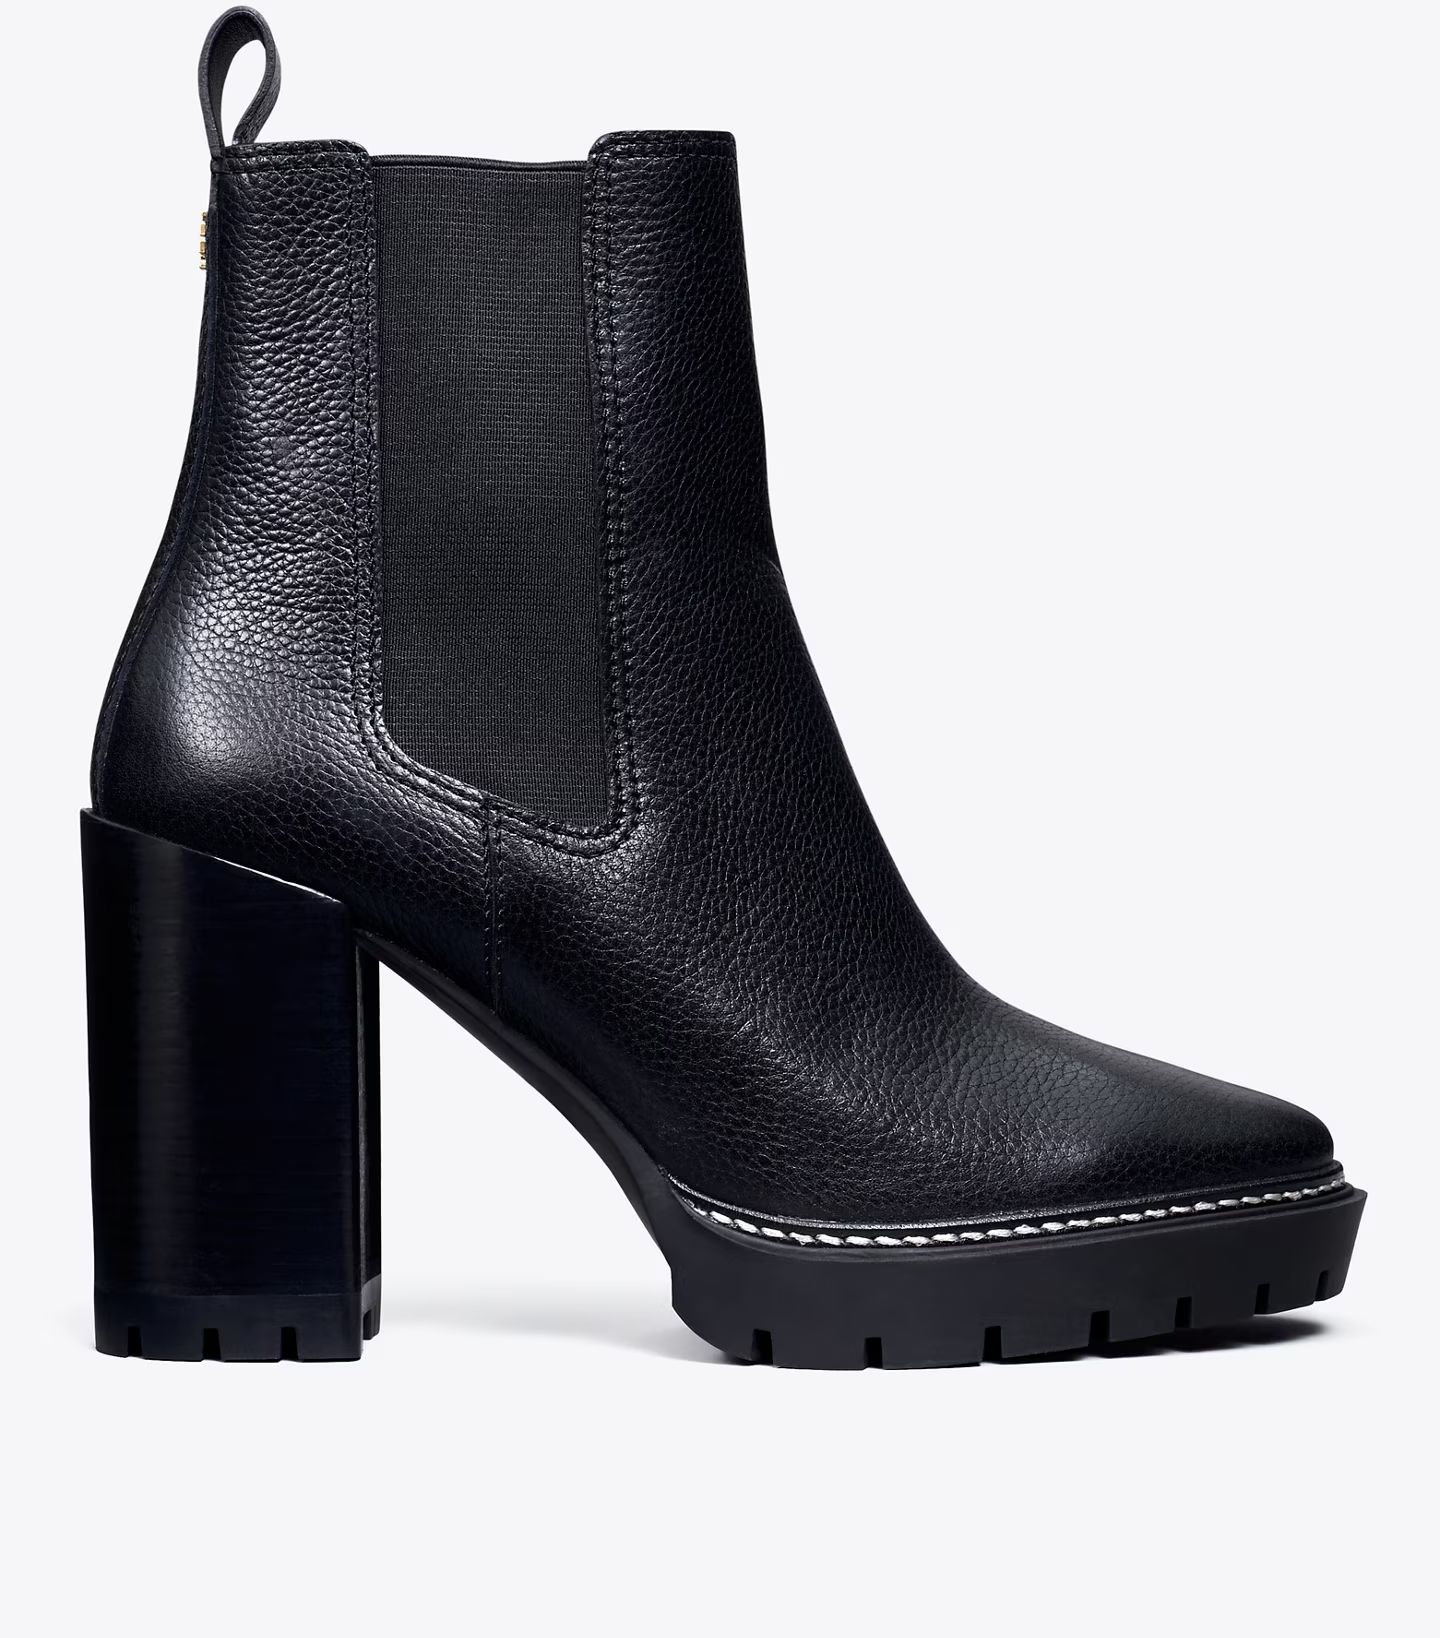 CARSON LUG-SOLE ANKLE BOOT | Tory Burch (US)